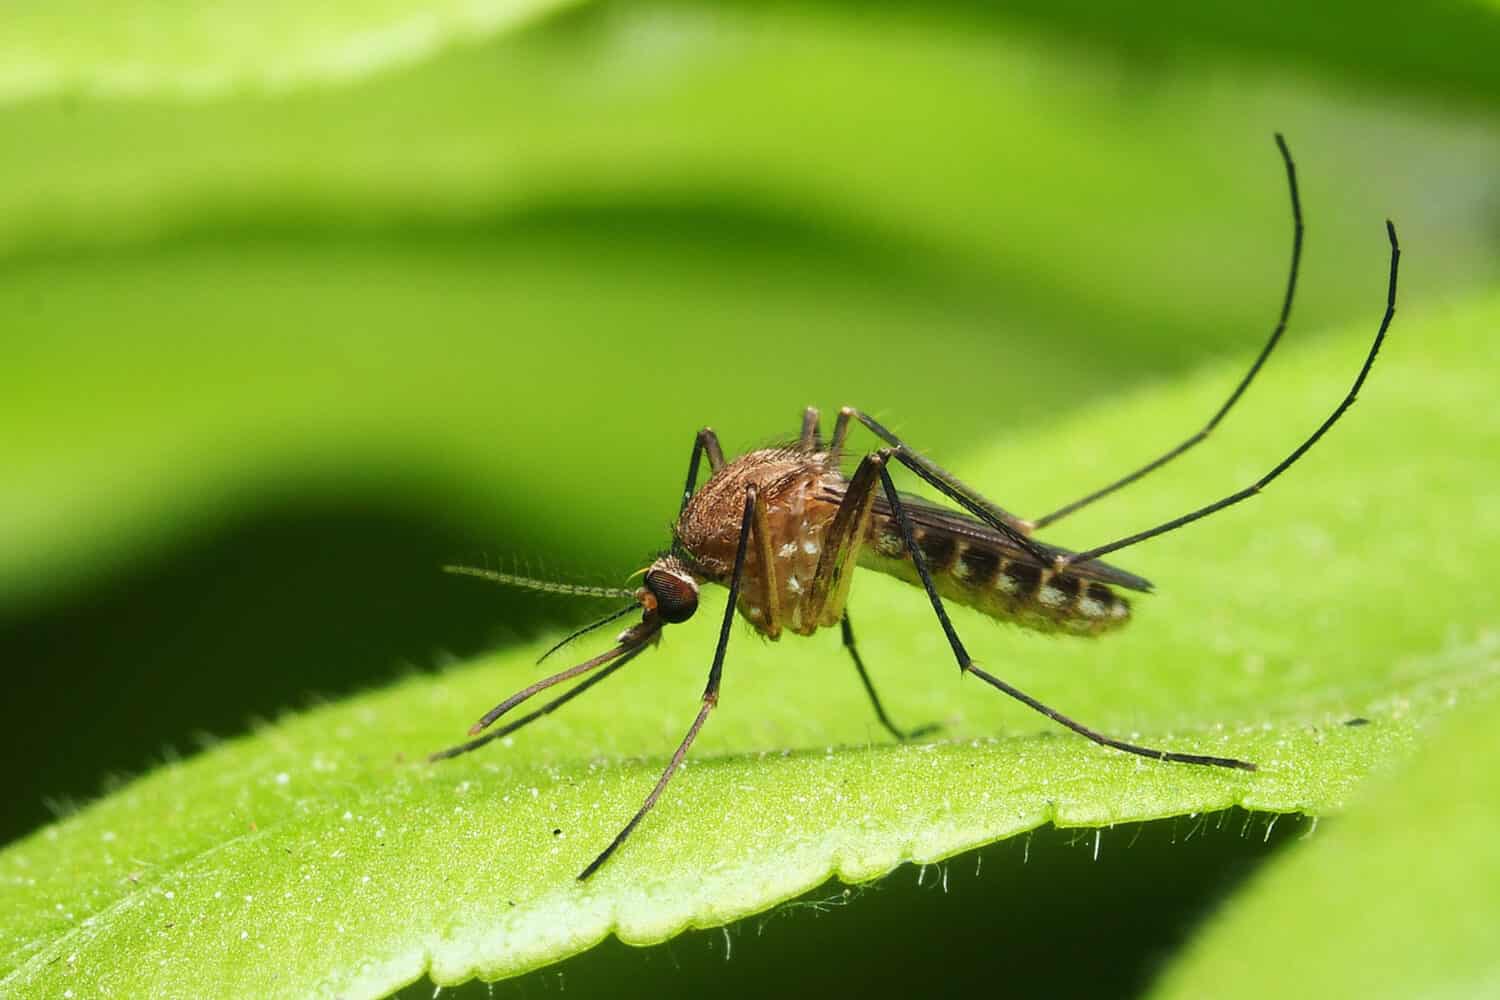 Mosquitoes play an important role in the ecosystem as pollinators